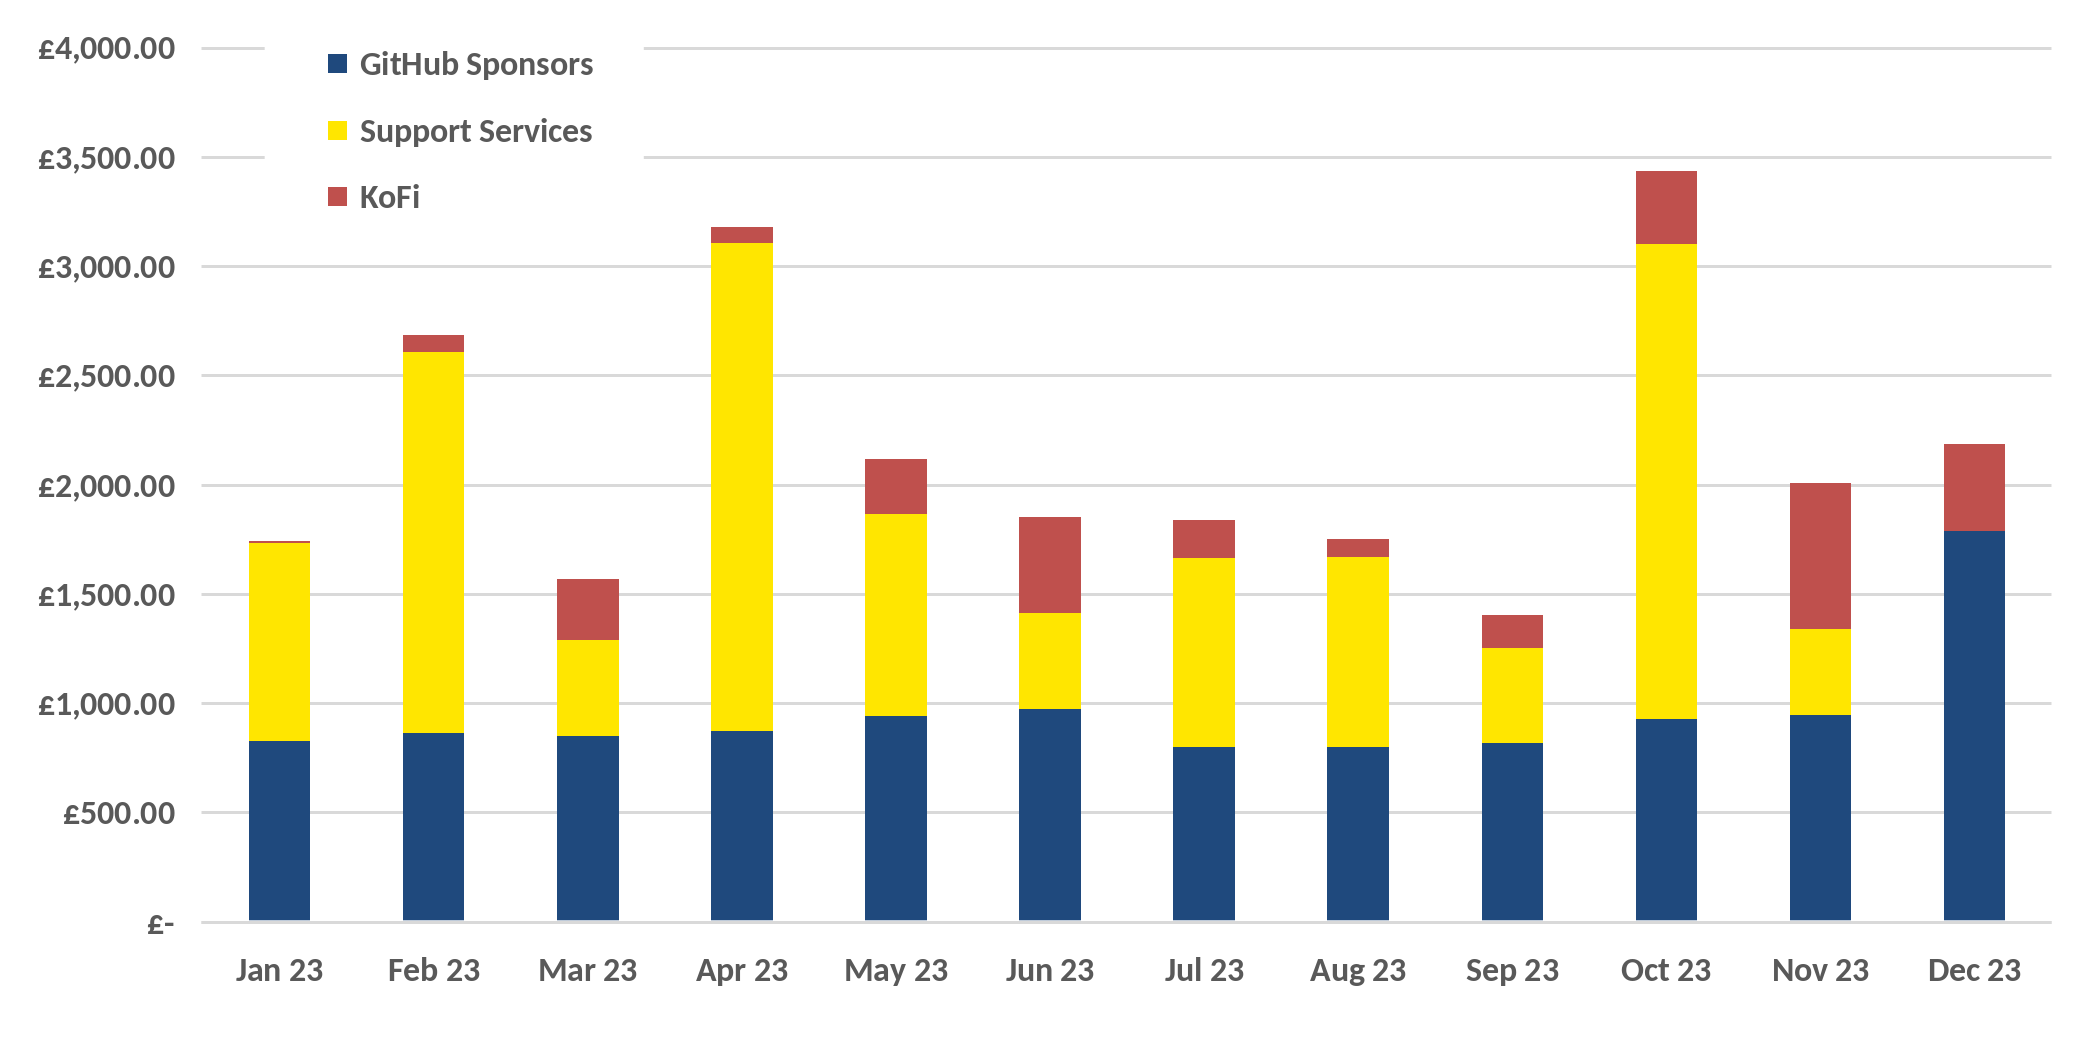 Monthly stacked bar chart revenue for 2023, split between sources: GitHub sponsors, Support Services & Ko-Fi. Most bars are between £1500 and £2000, although three spike just beyond £3000